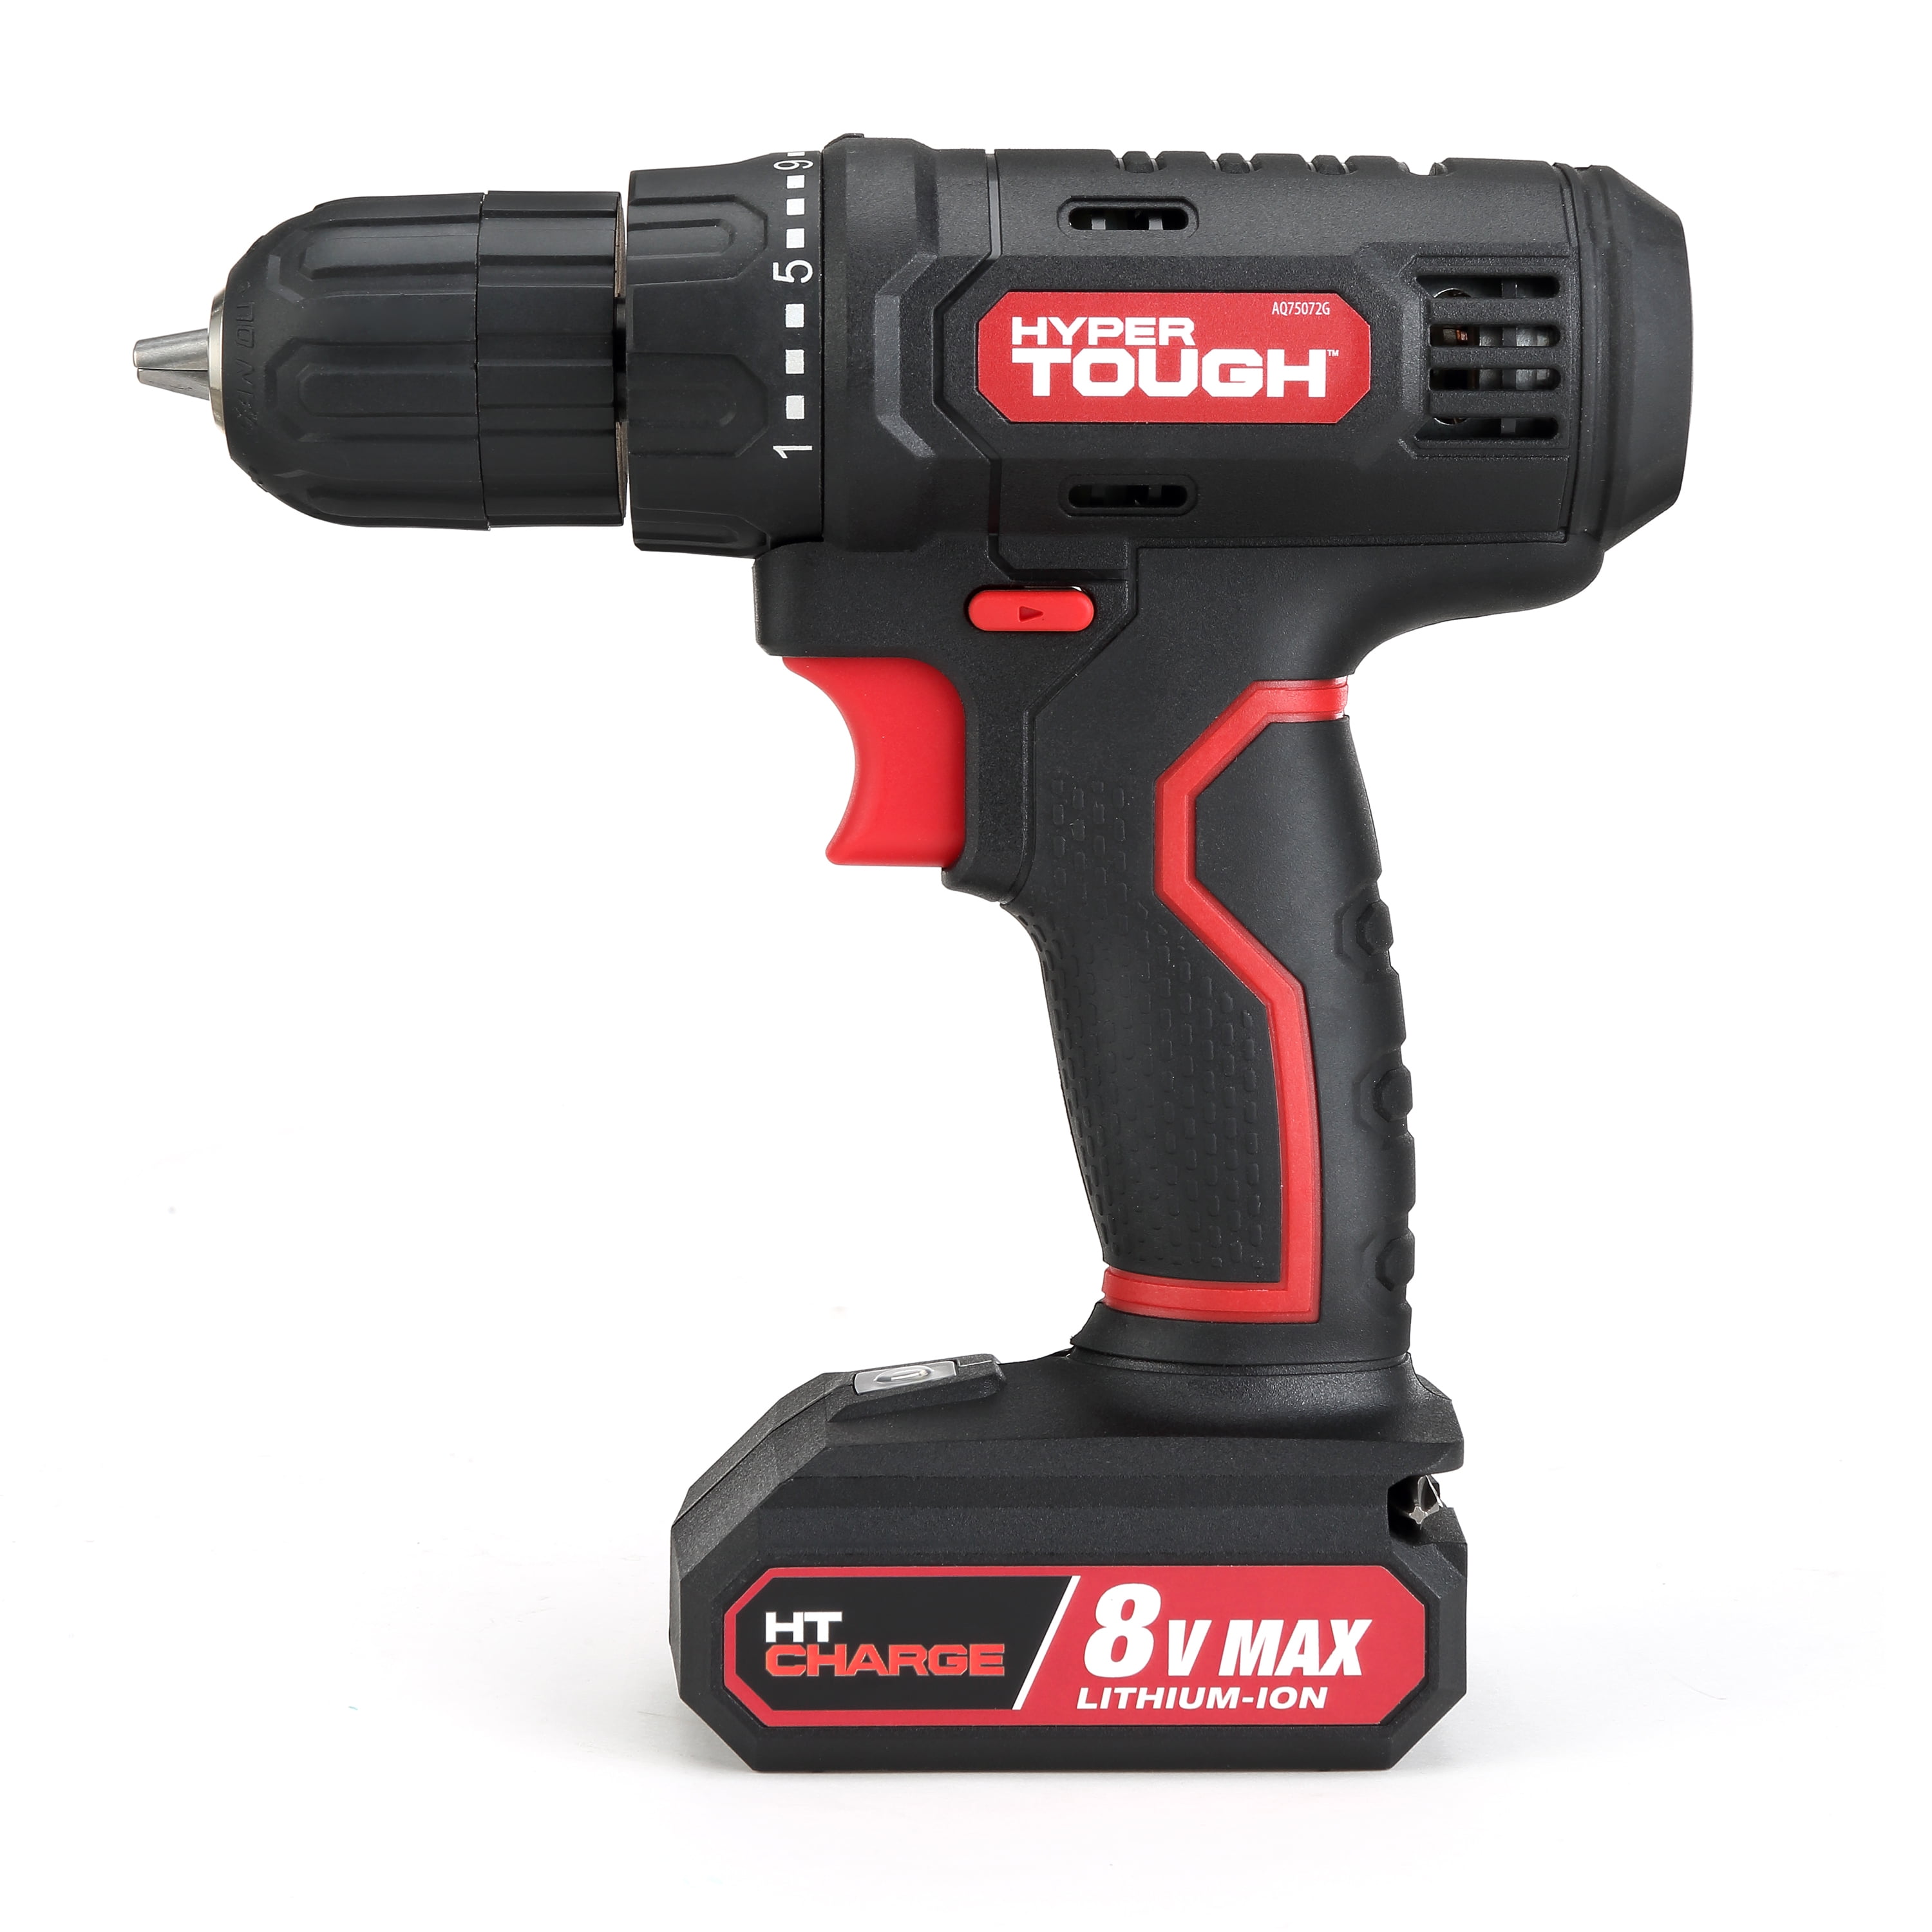 Hyper Tough 8V Max Cordless Drill, 3/8 inch Chuck, Non-Removable 1.5Ah Battery with Charger, Bit Holder & LED Light